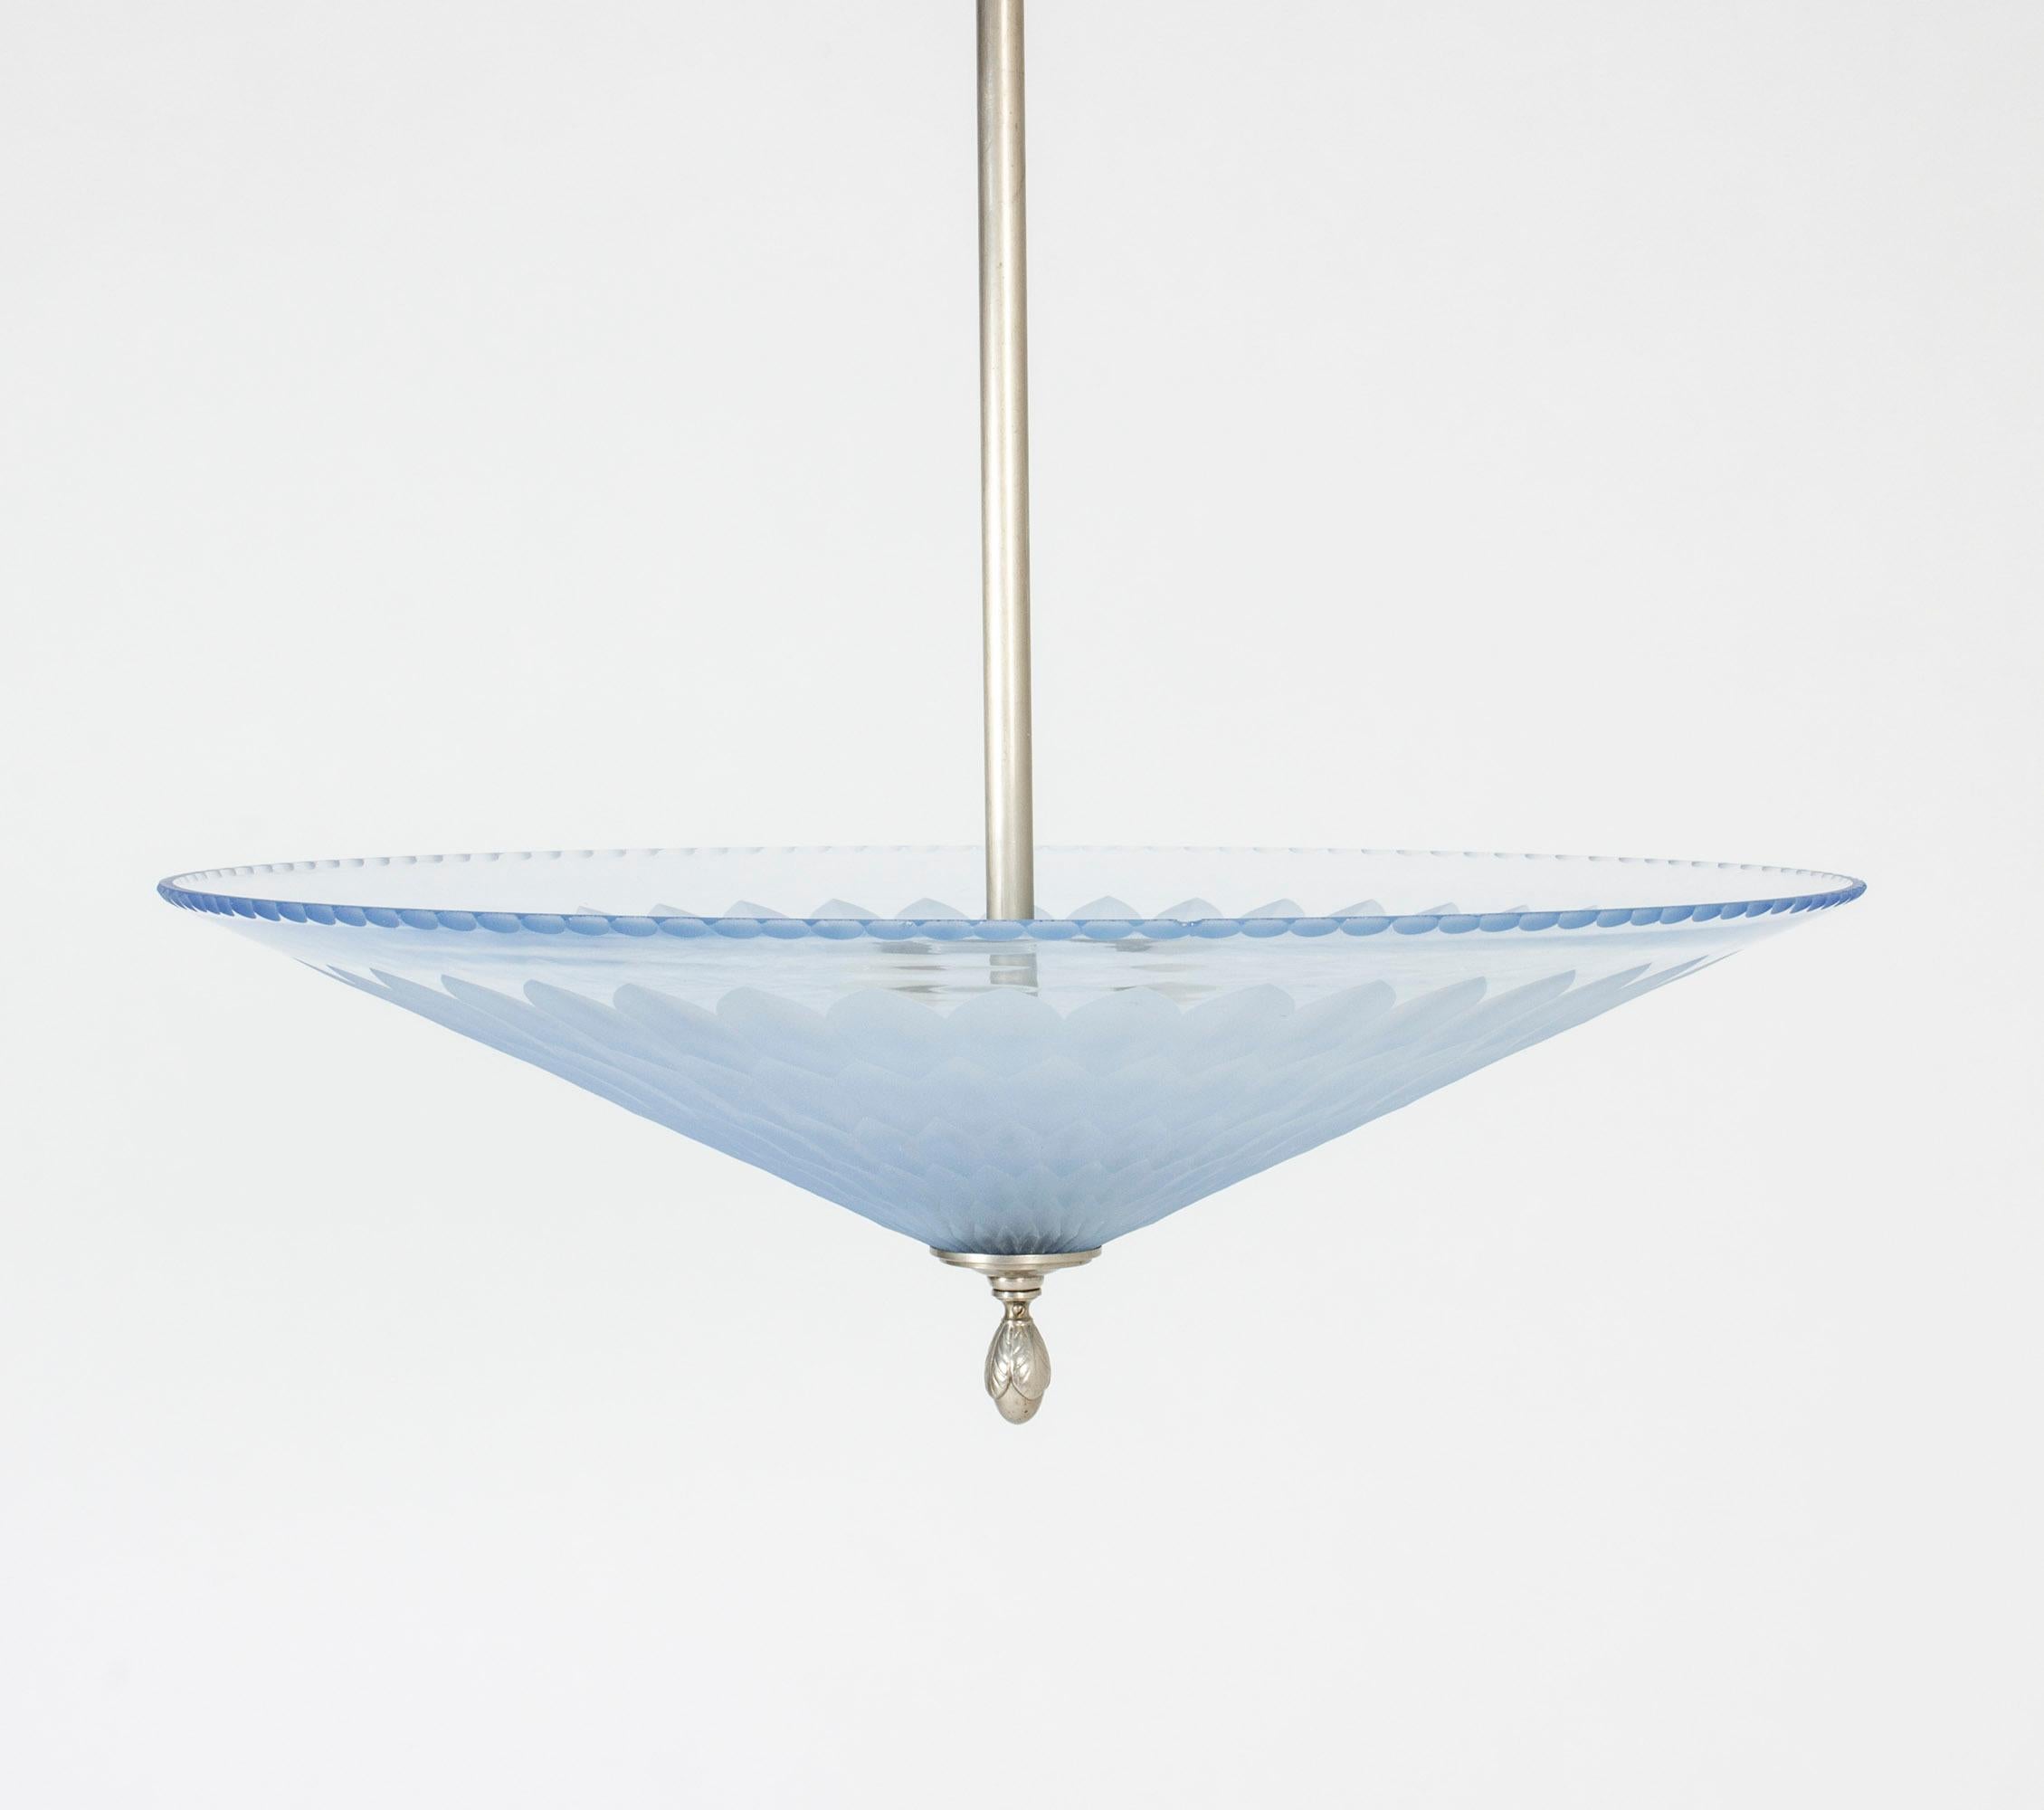 Exquisite ceiling lamp by Edward Hald, made from brushed steel and blue glass. Beautiful cut pattern and scalloped edge. One small chip in the edge.